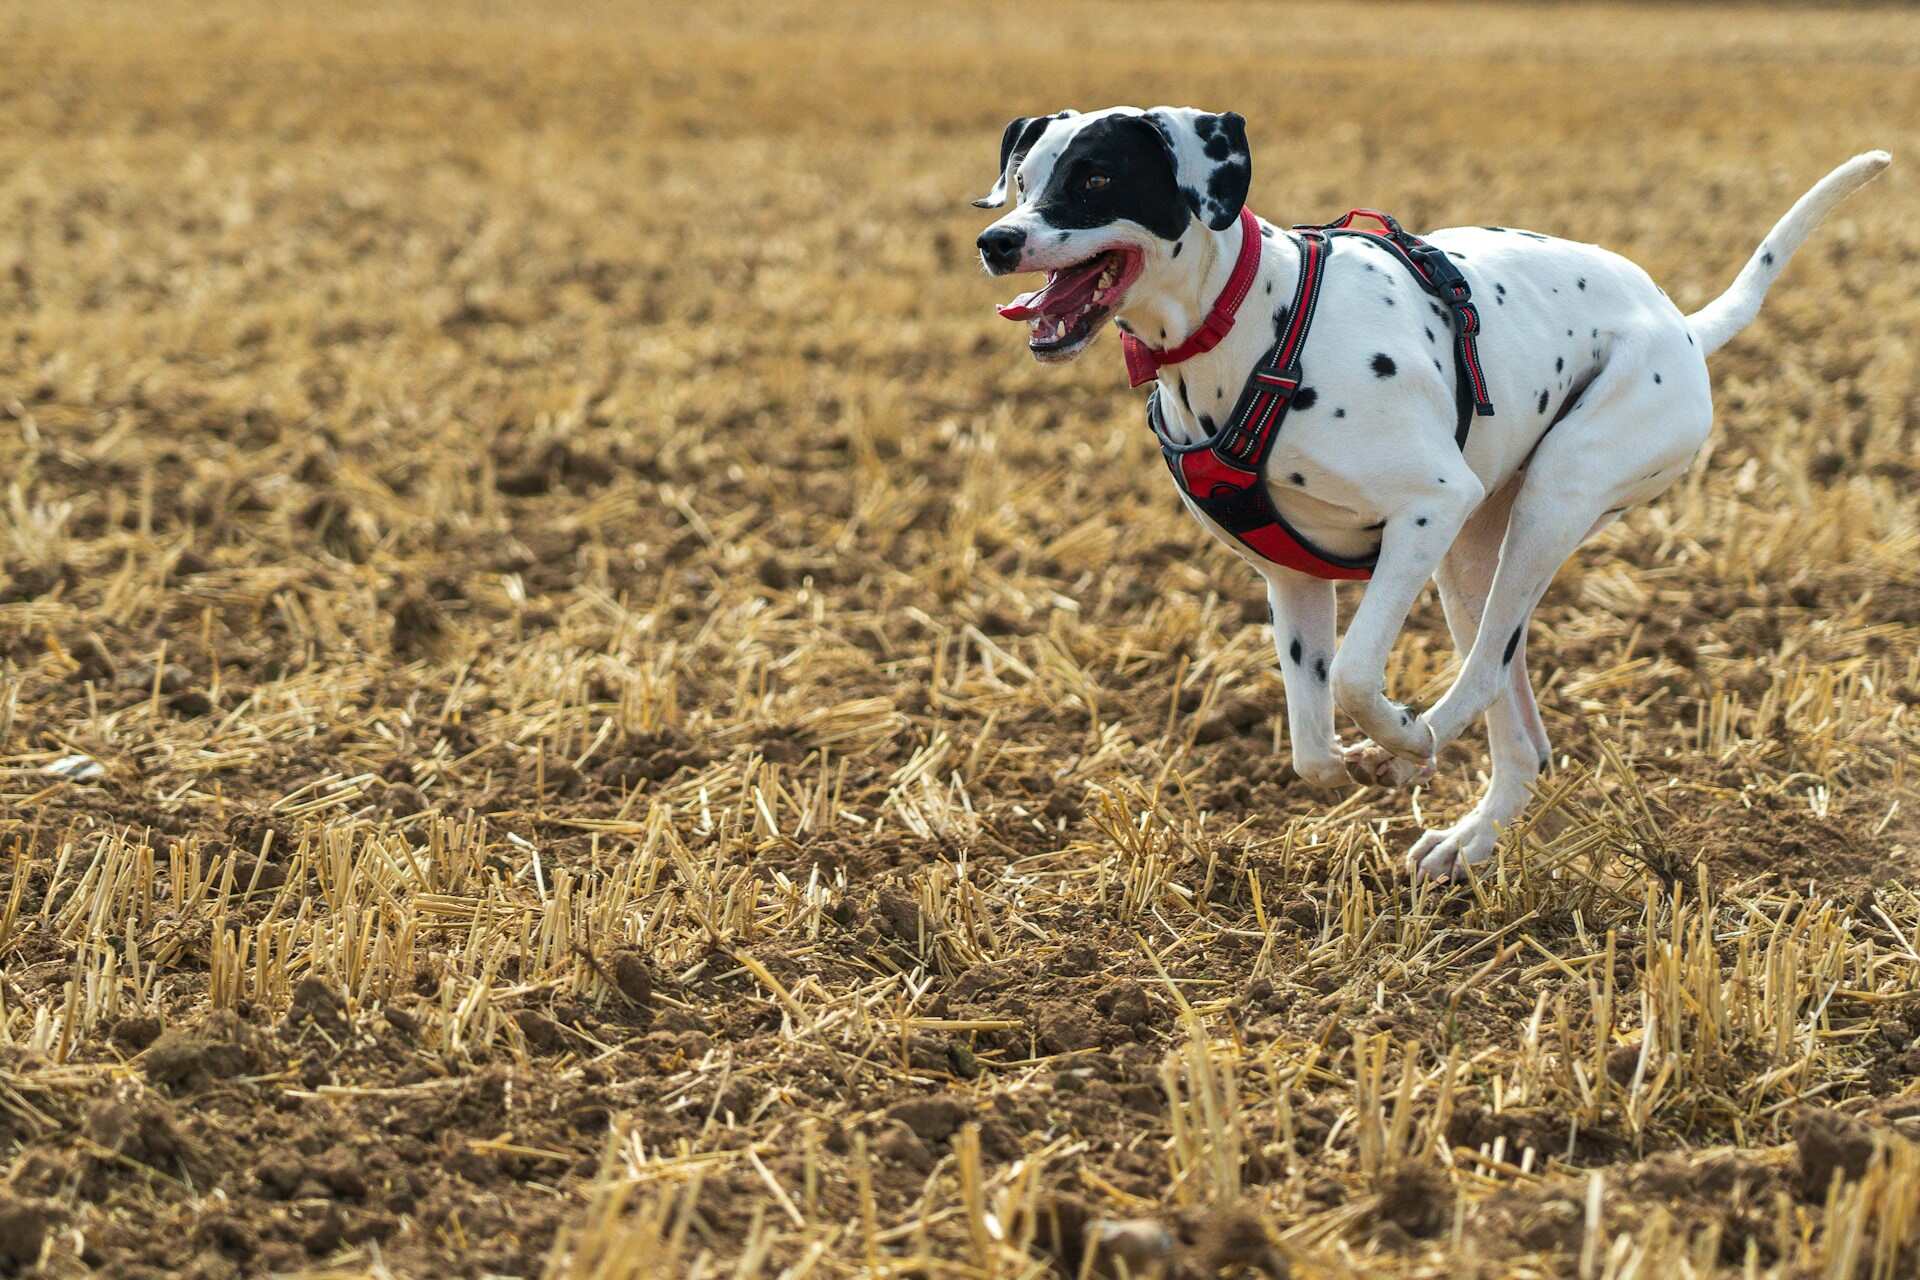 A black and white dog wearing a harness running in a field